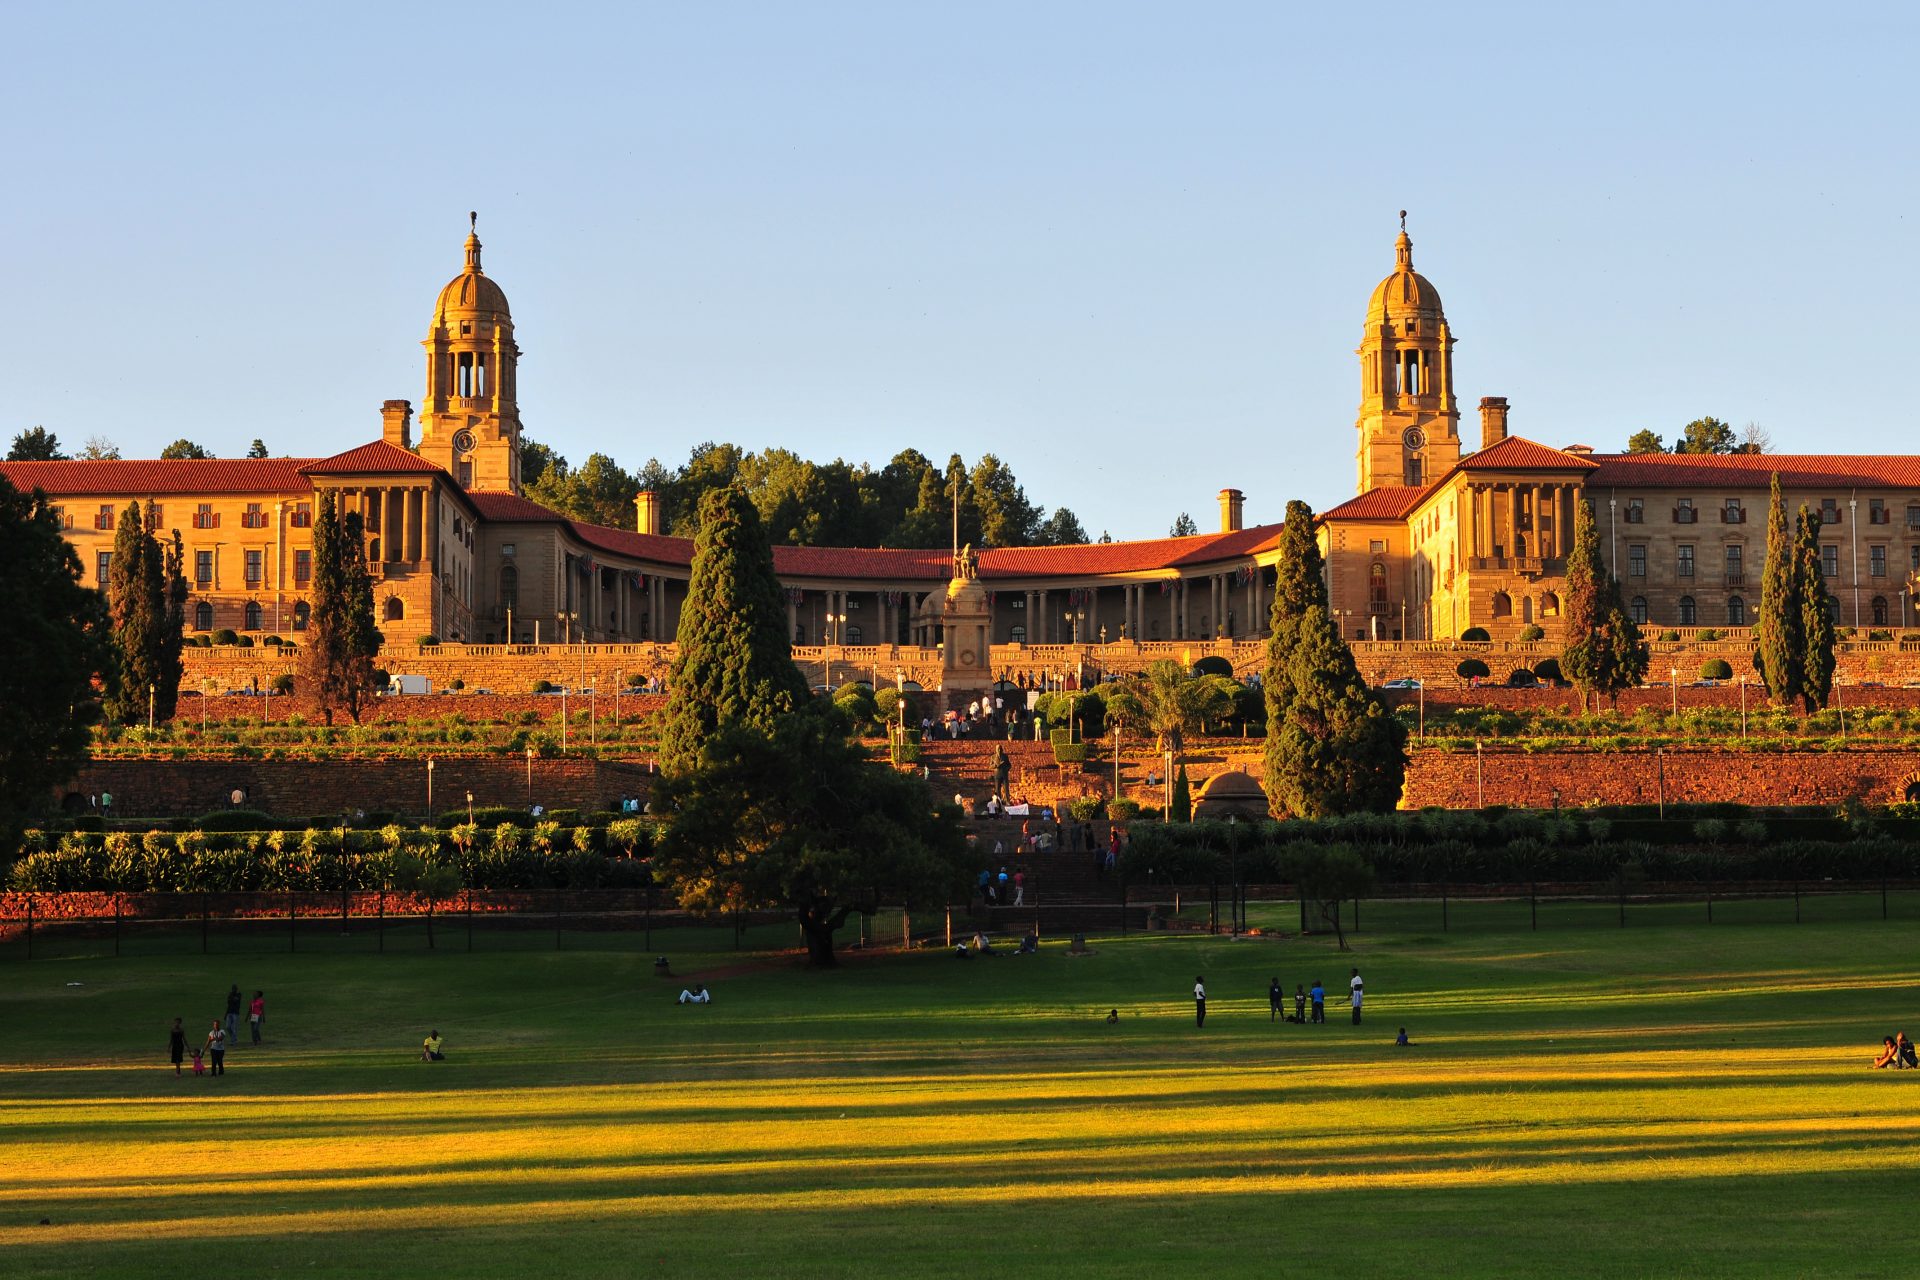 "South African Union Buildings seen here at sundown. The Union Buildings were built from light sandstone and designed by the Sir Herbert Baker in the English monumental style. The Buildings are over 275 m long and a semi-circular shape, with the two wings at the sides that represent the union of a formerly divided people. (English and Afrikaans). The Union Buildings are considered by many to be the architect's greatest achievement and a South African architectural masterpiece. The cornerstone was laid in November 1910. Requiring over 1,265 workers over 3 years to build, the structure was completed in 1913. Today, the official seat of the South African government and also the offices of the President of South Africa."